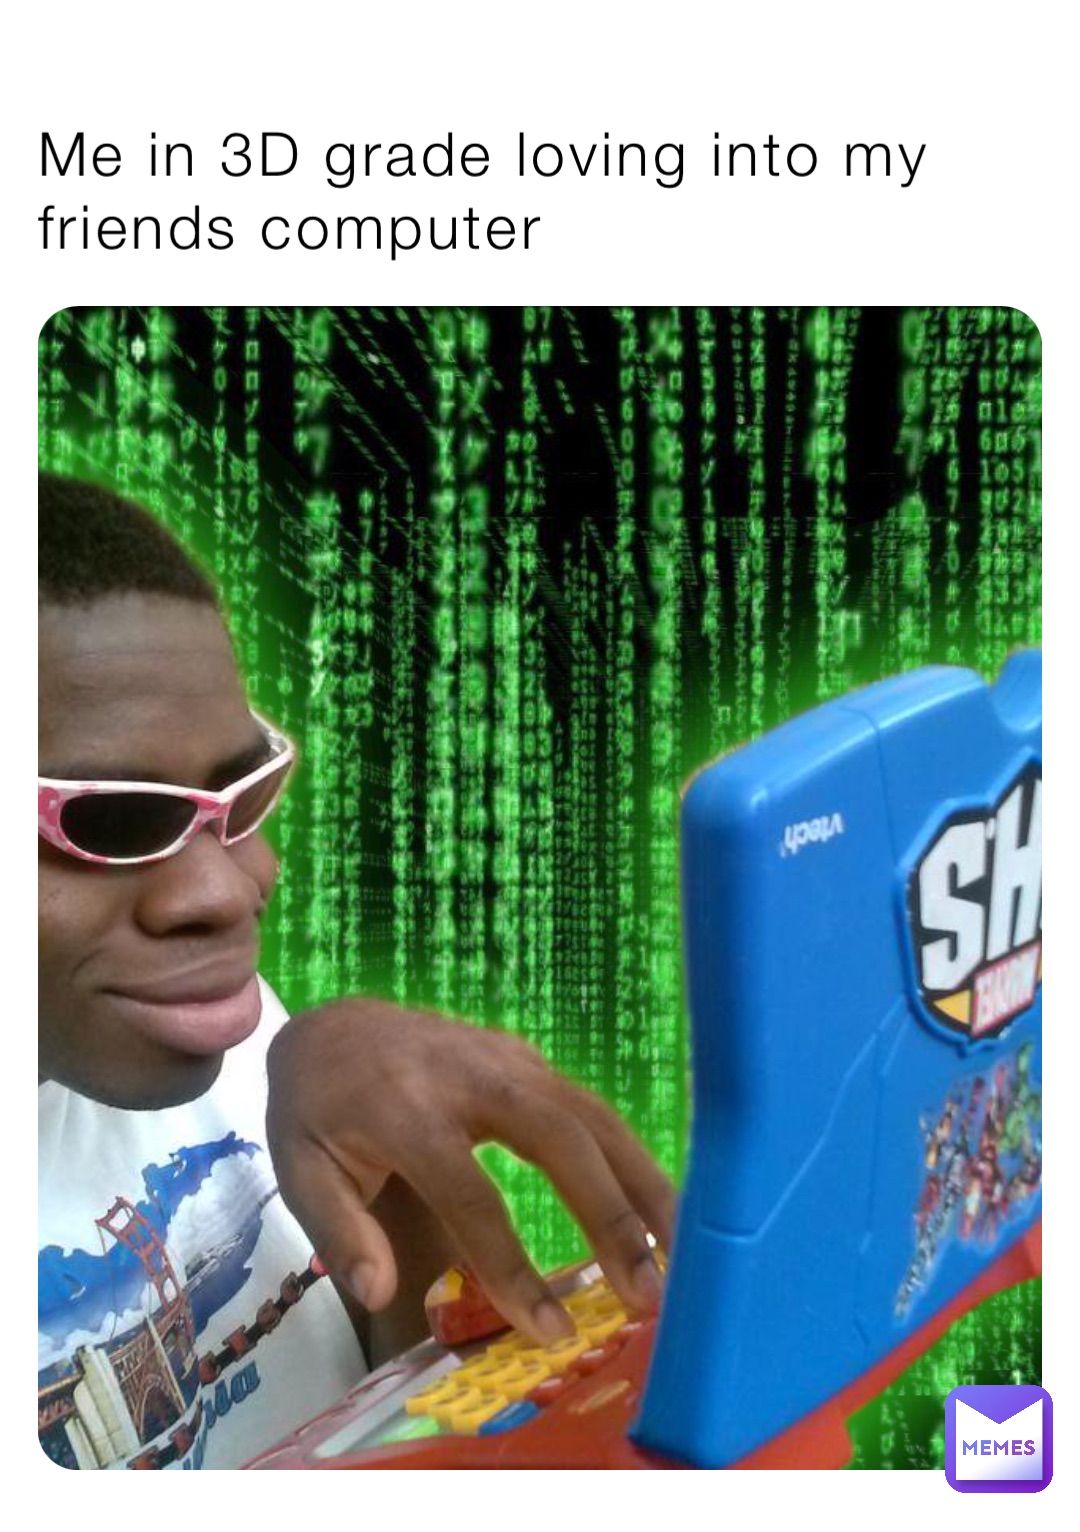 Me in 3D grade loving into my friends computer